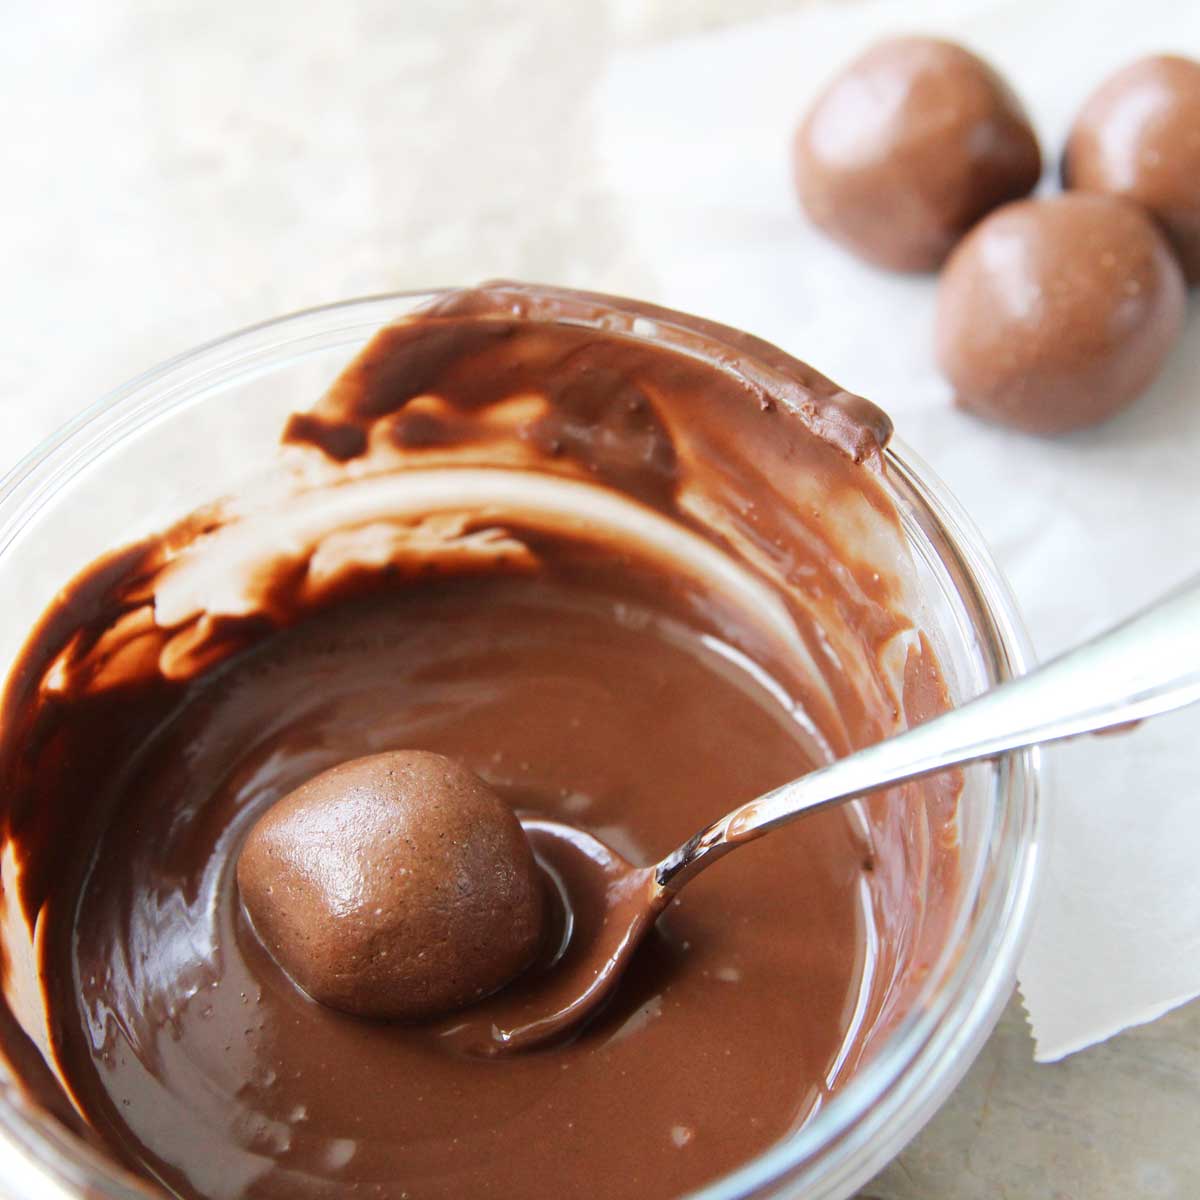 Dip the Nutella protein balls in melted chocolate